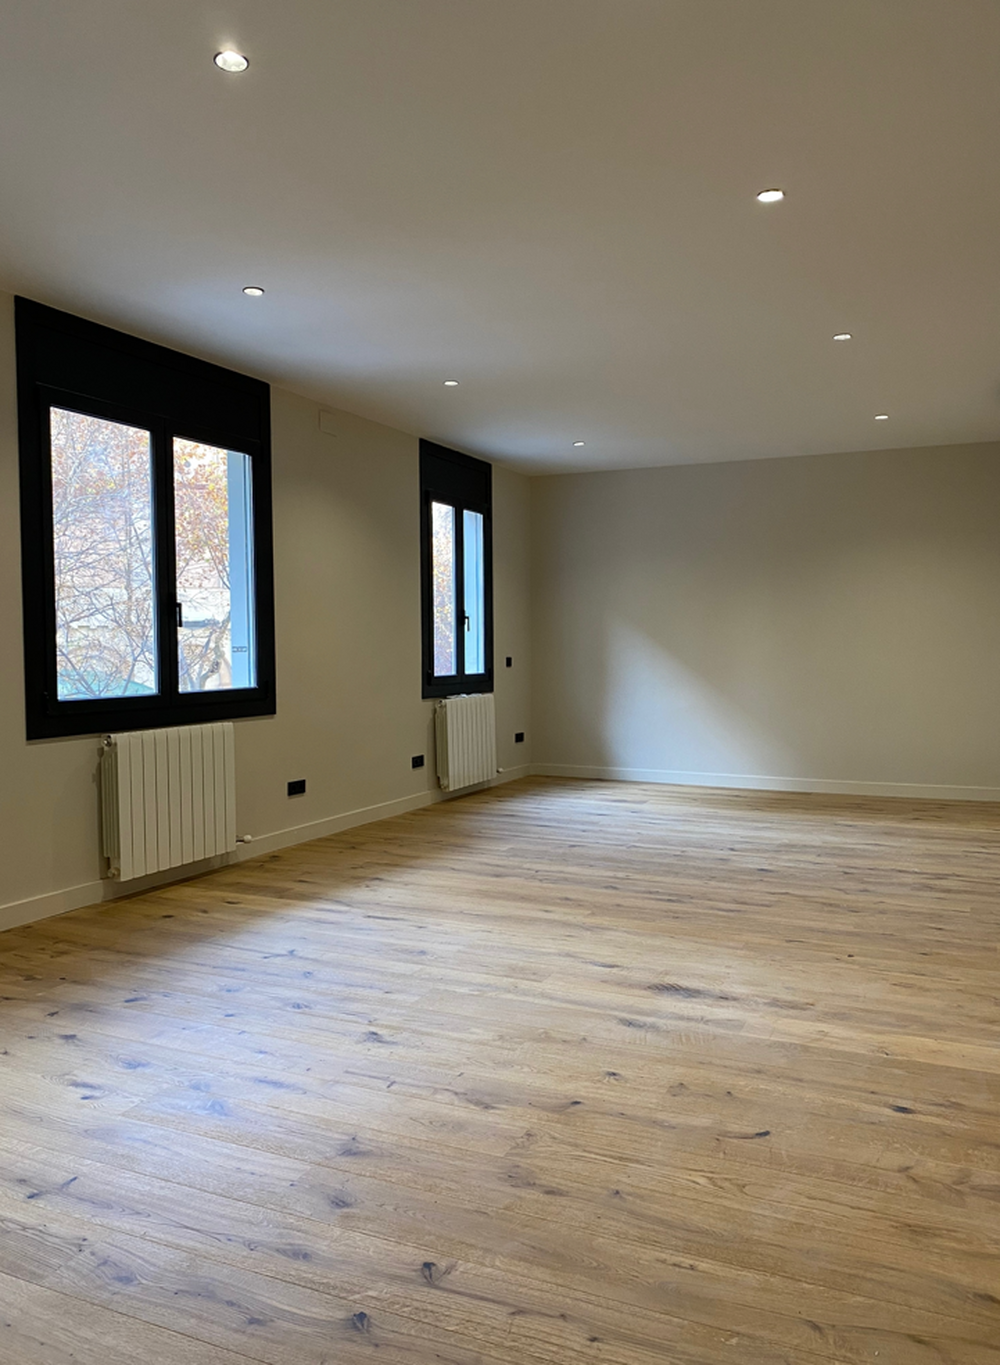 Flat for sale newly refurbished with 3 bedrooms